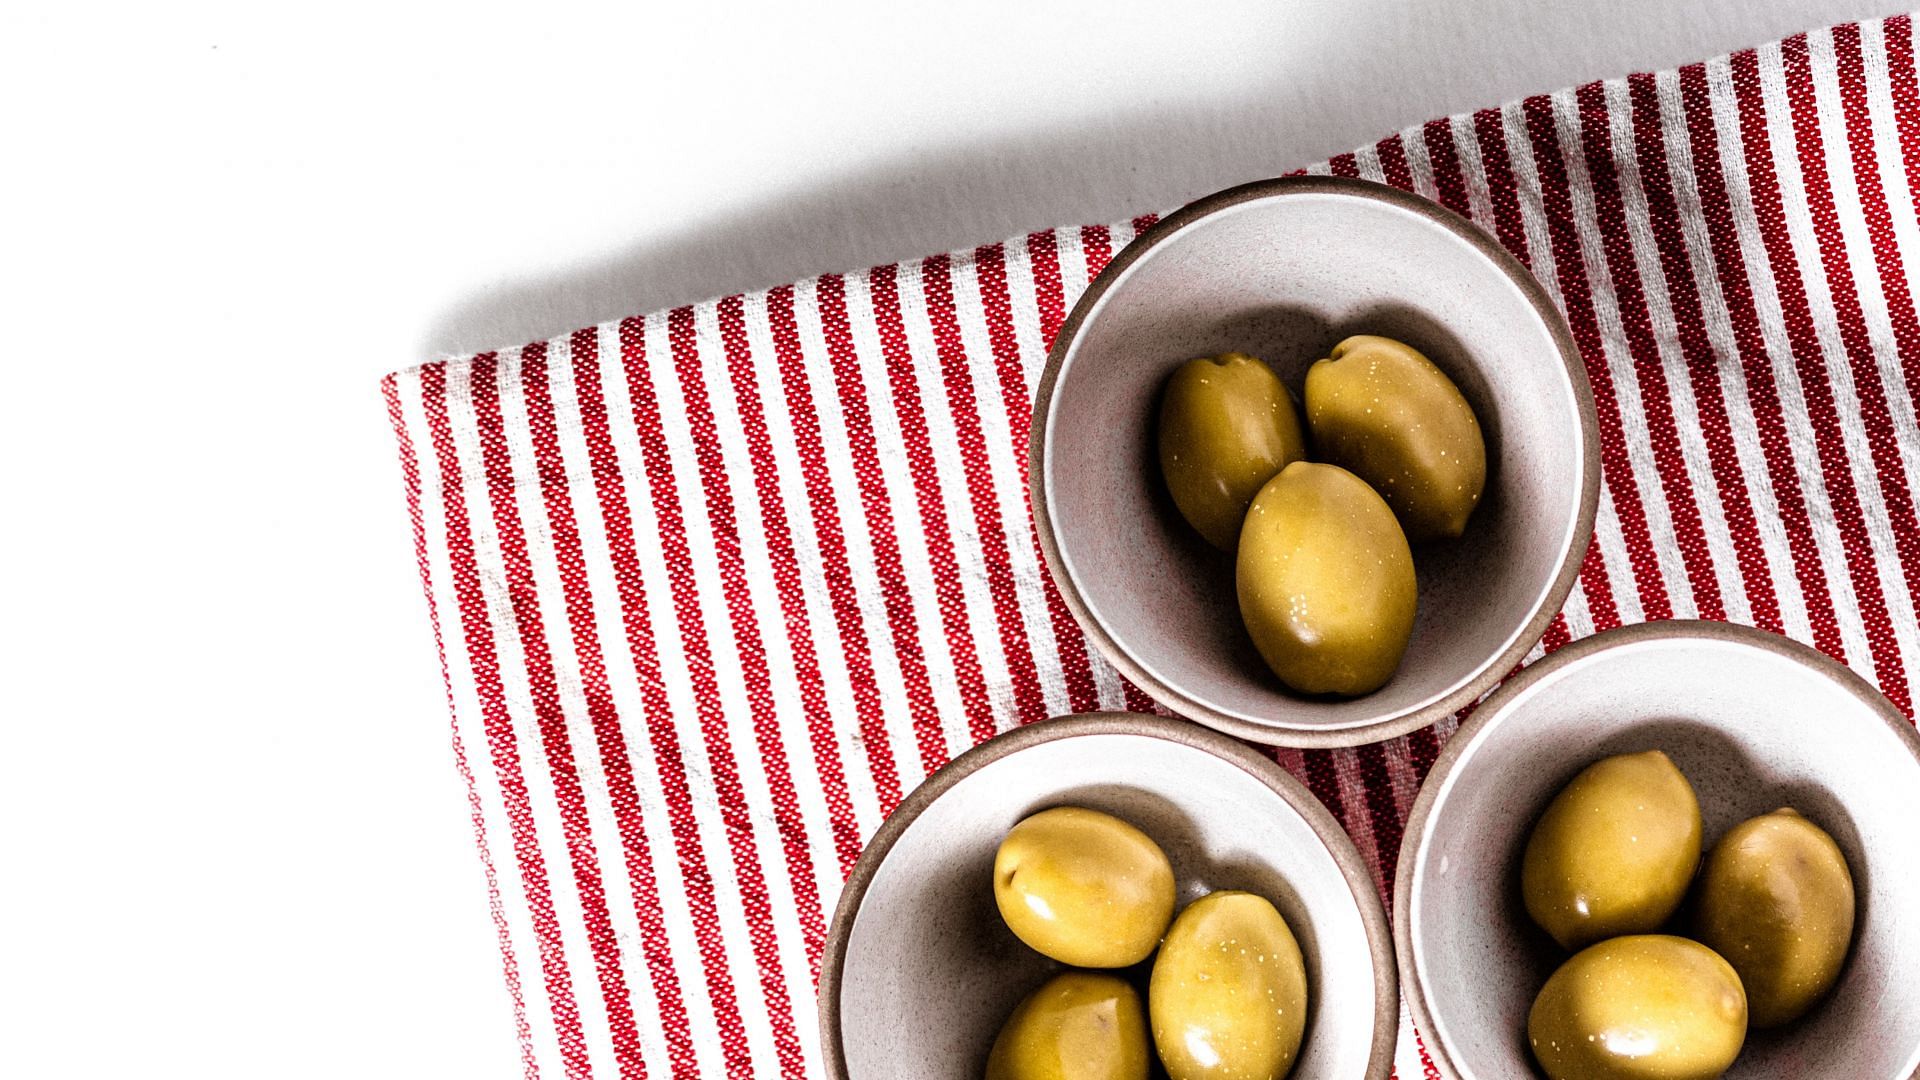 Green olives are used to produce olive oil. (Image via Unsplash/Kier in Sight)